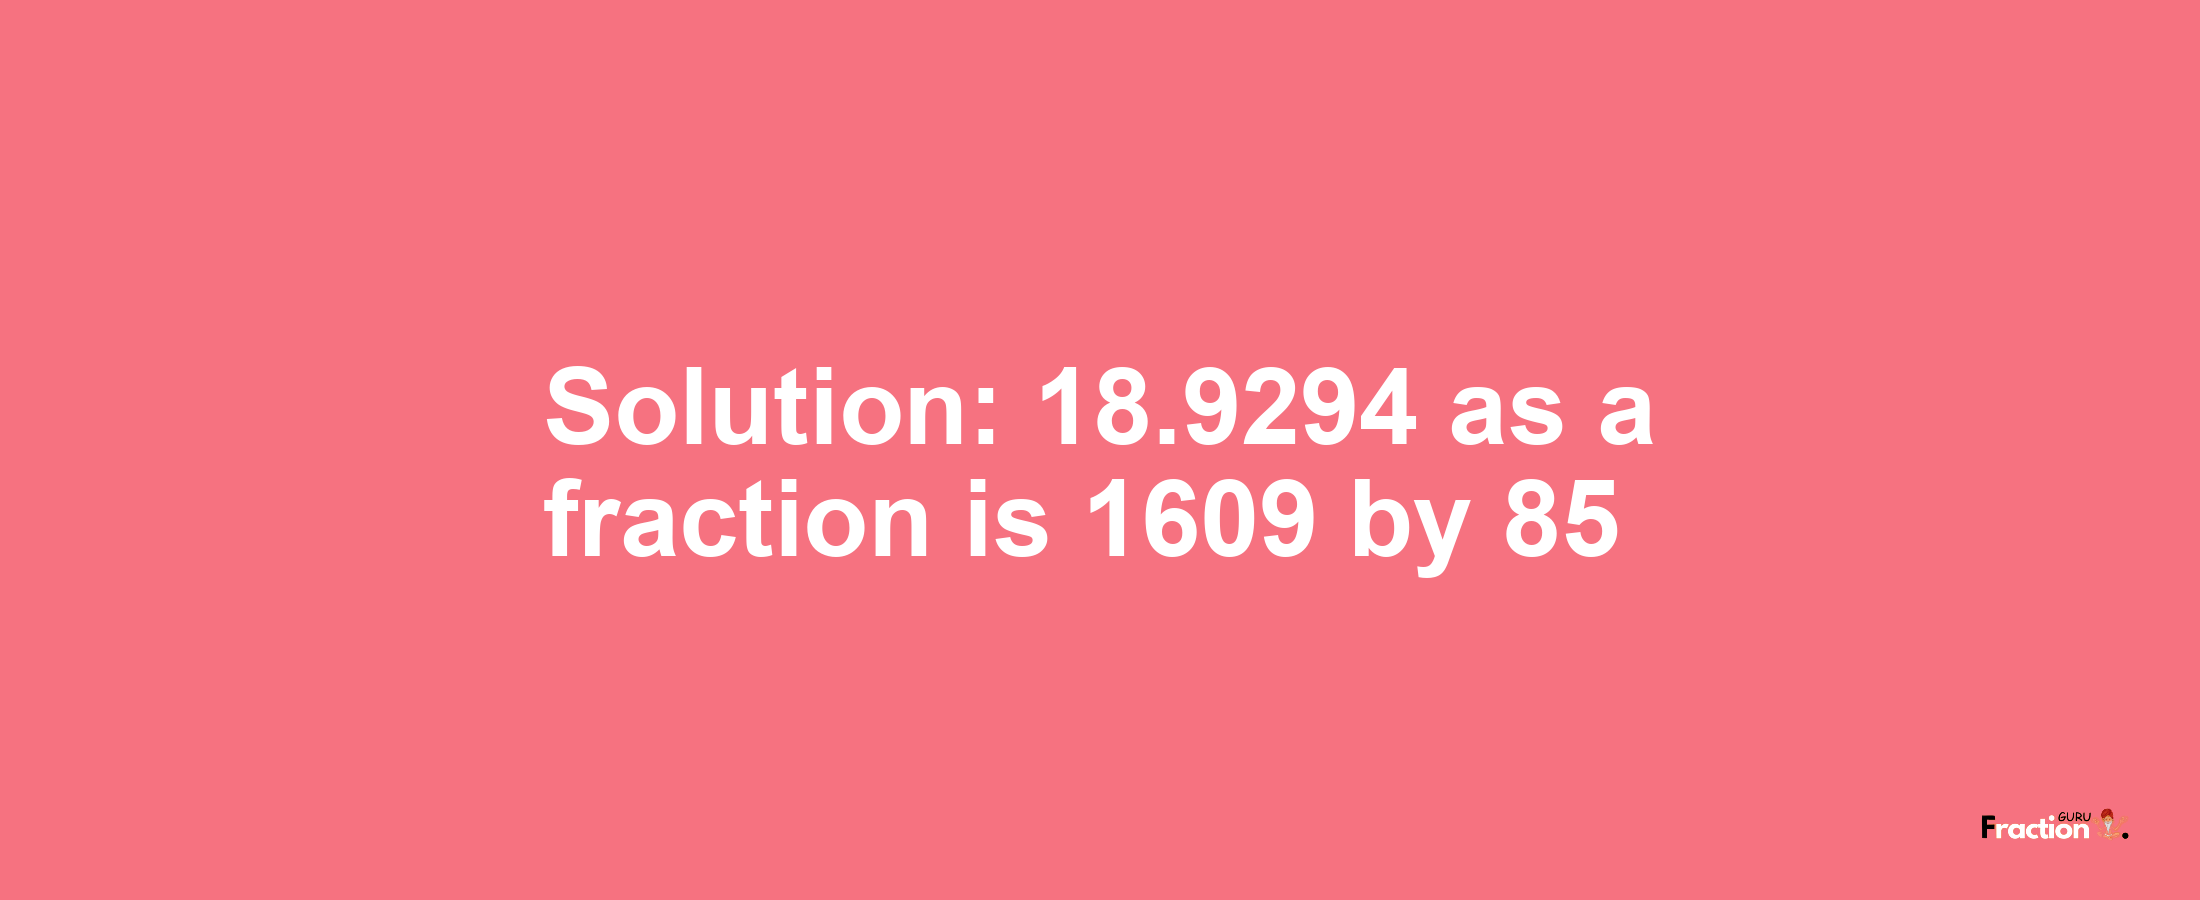 Solution:18.9294 as a fraction is 1609/85